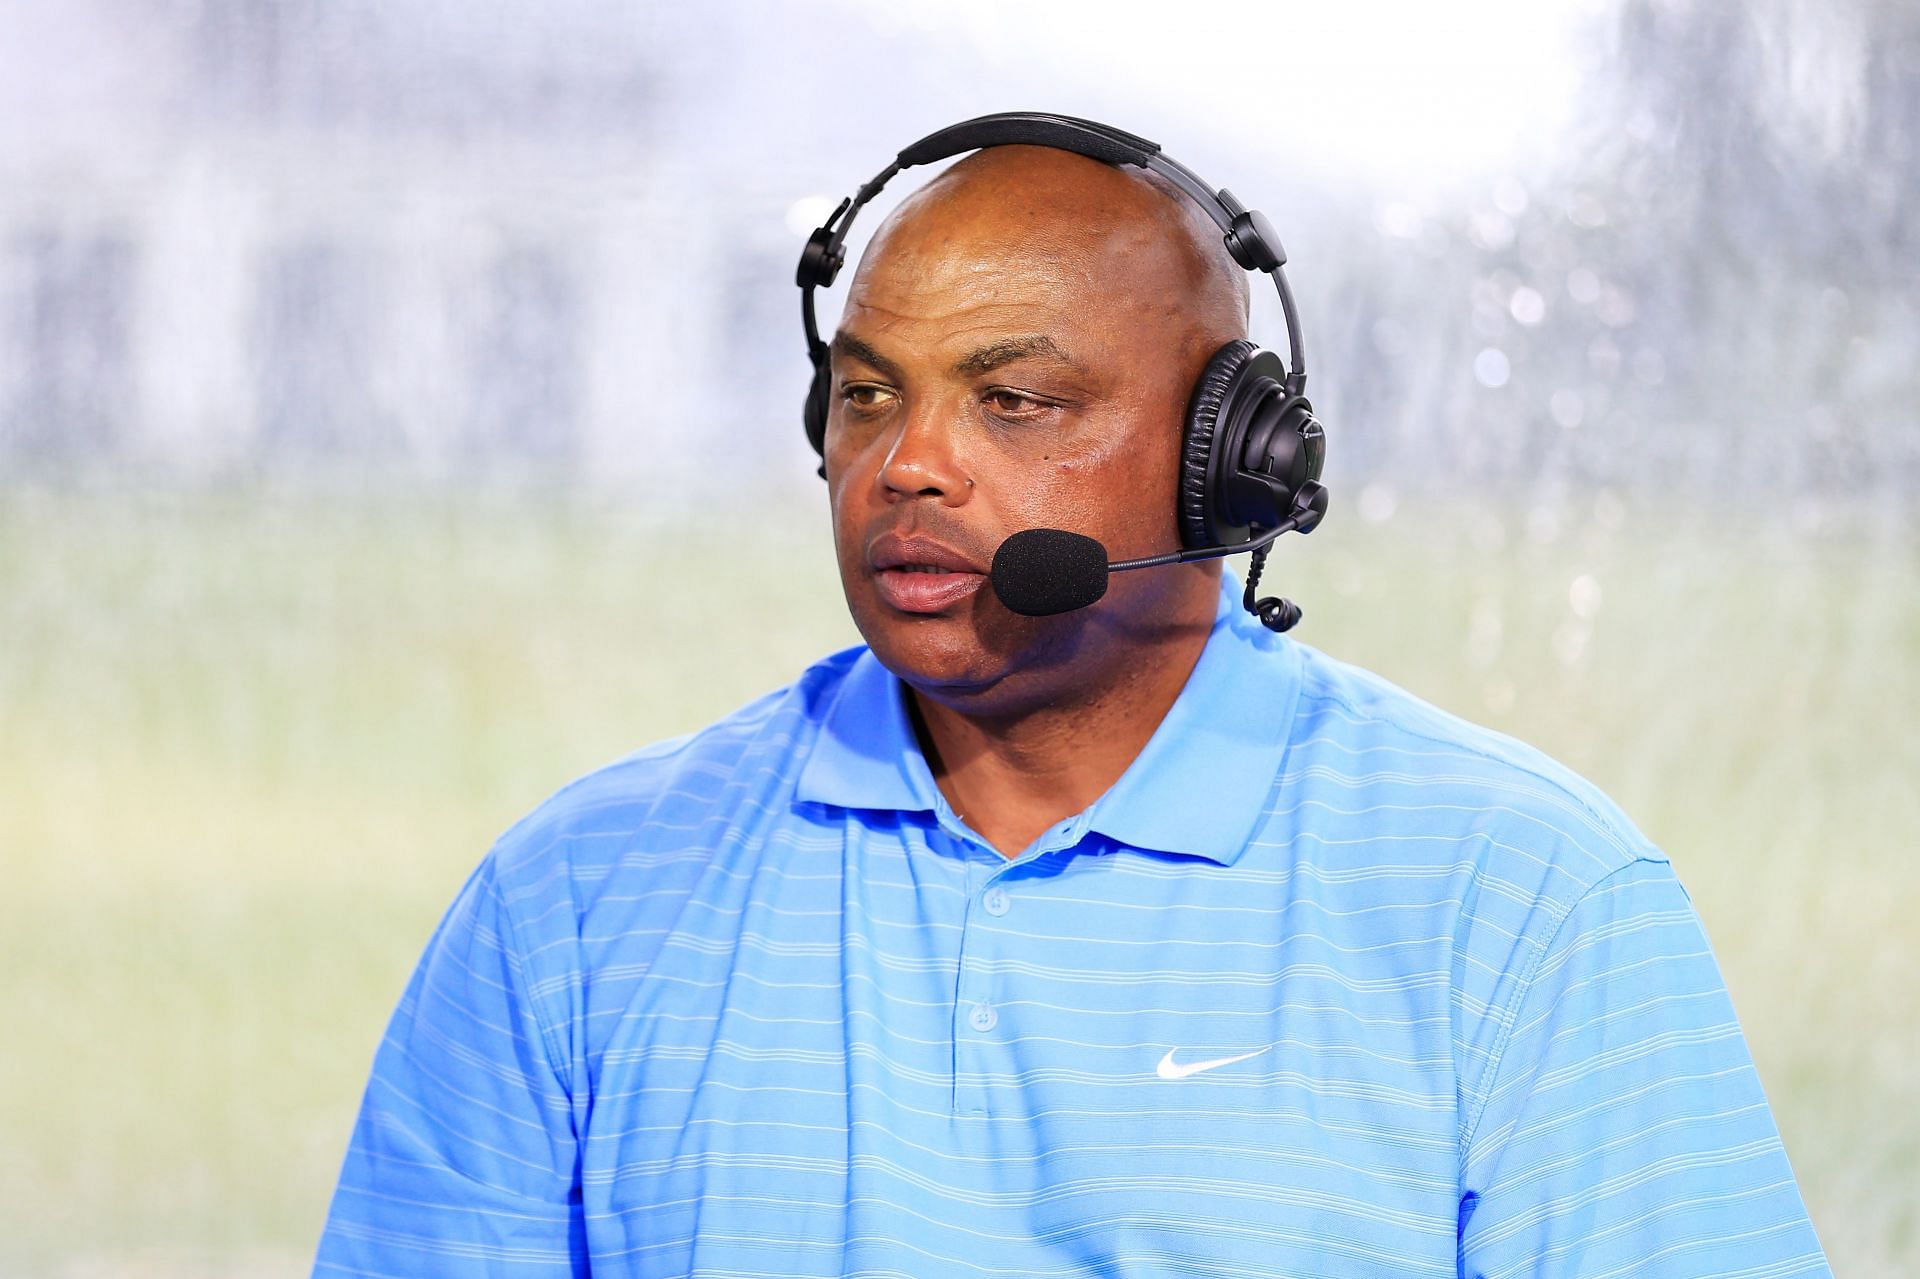 Charles Barkley at The Match: Champions For Charity